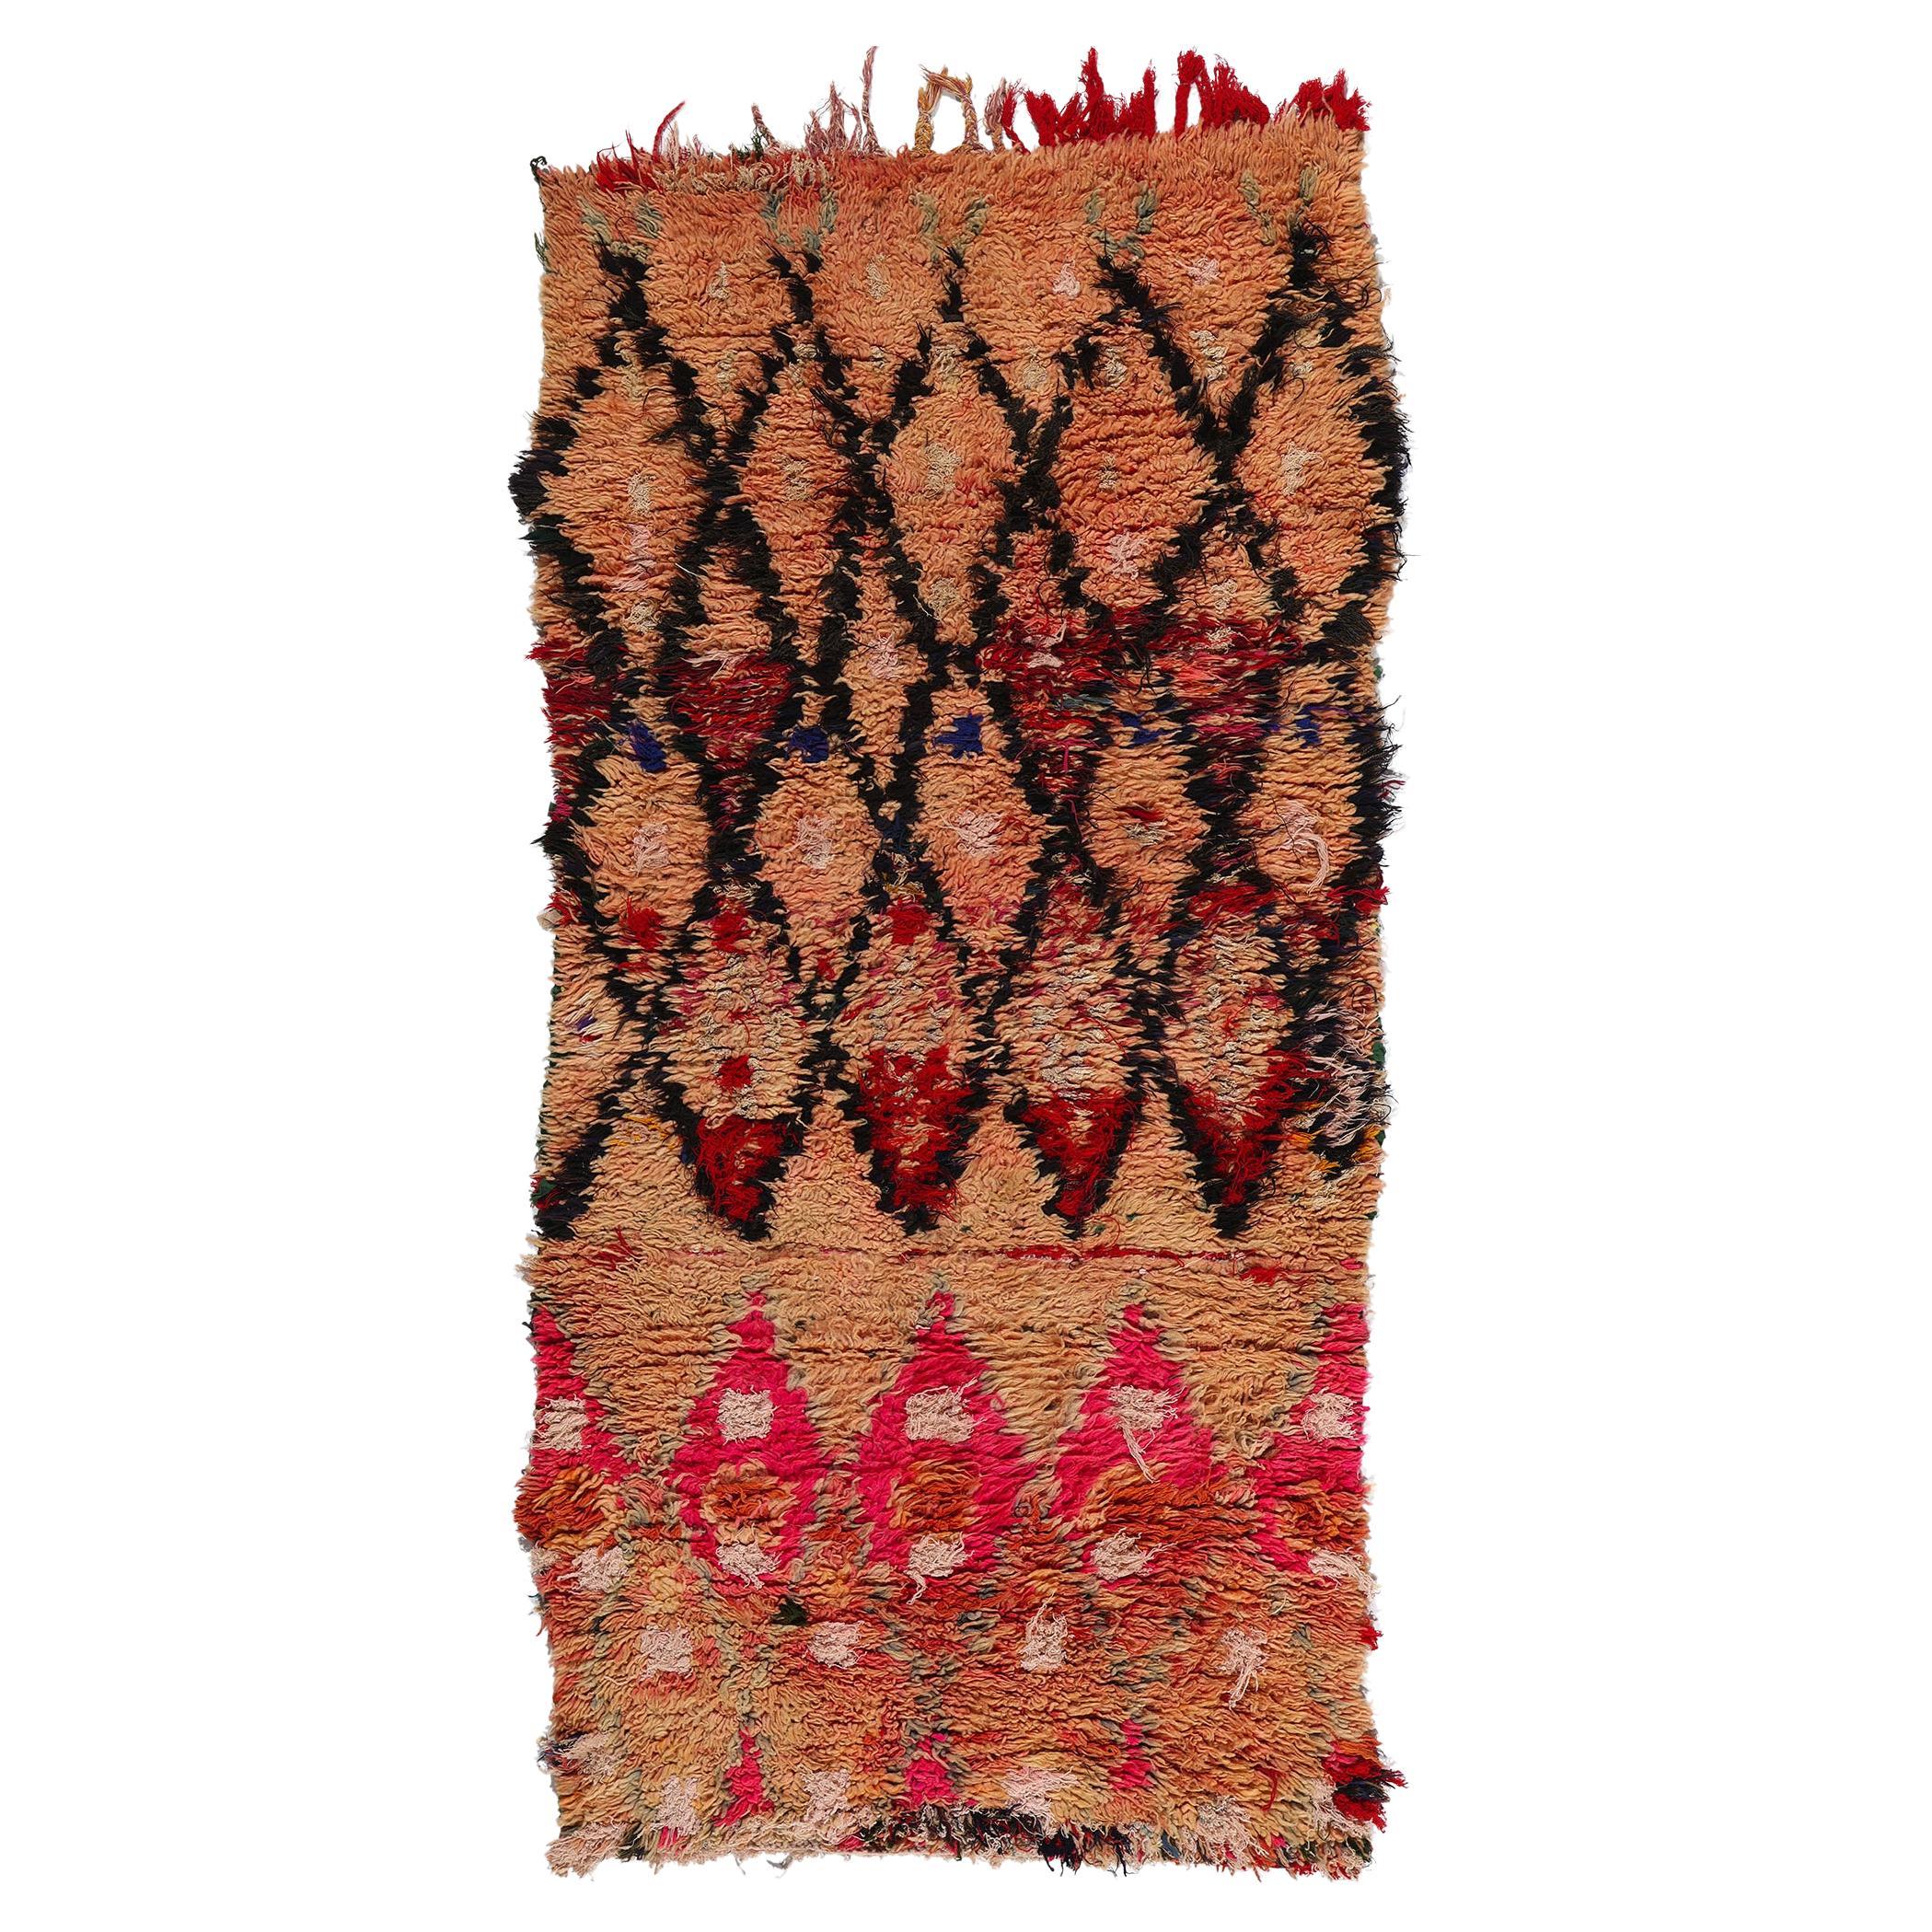 Vintage Boucherouite Moroccan Azilal Rag Rug, Sustainability Meets Cozy Nomad For Sale